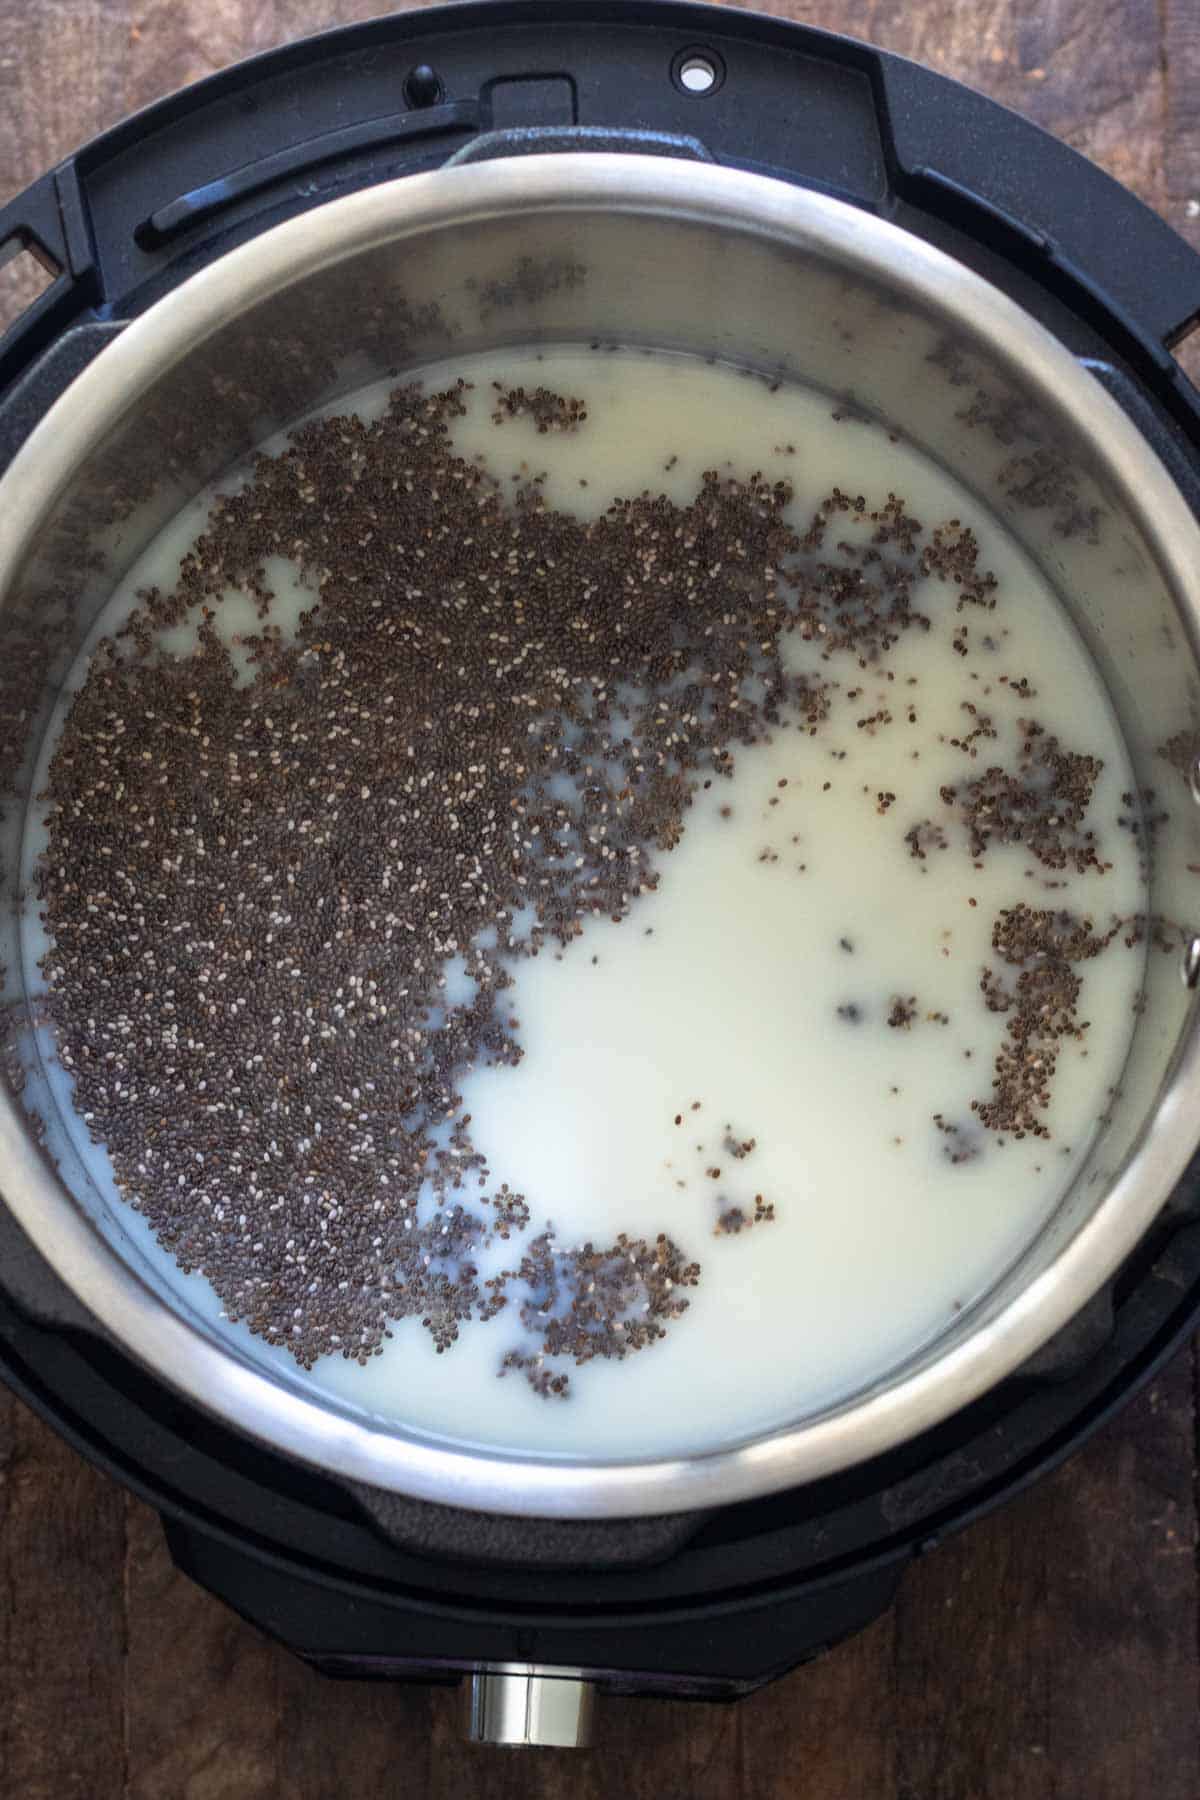 Chia seeds added to milk in the Instant Pot.